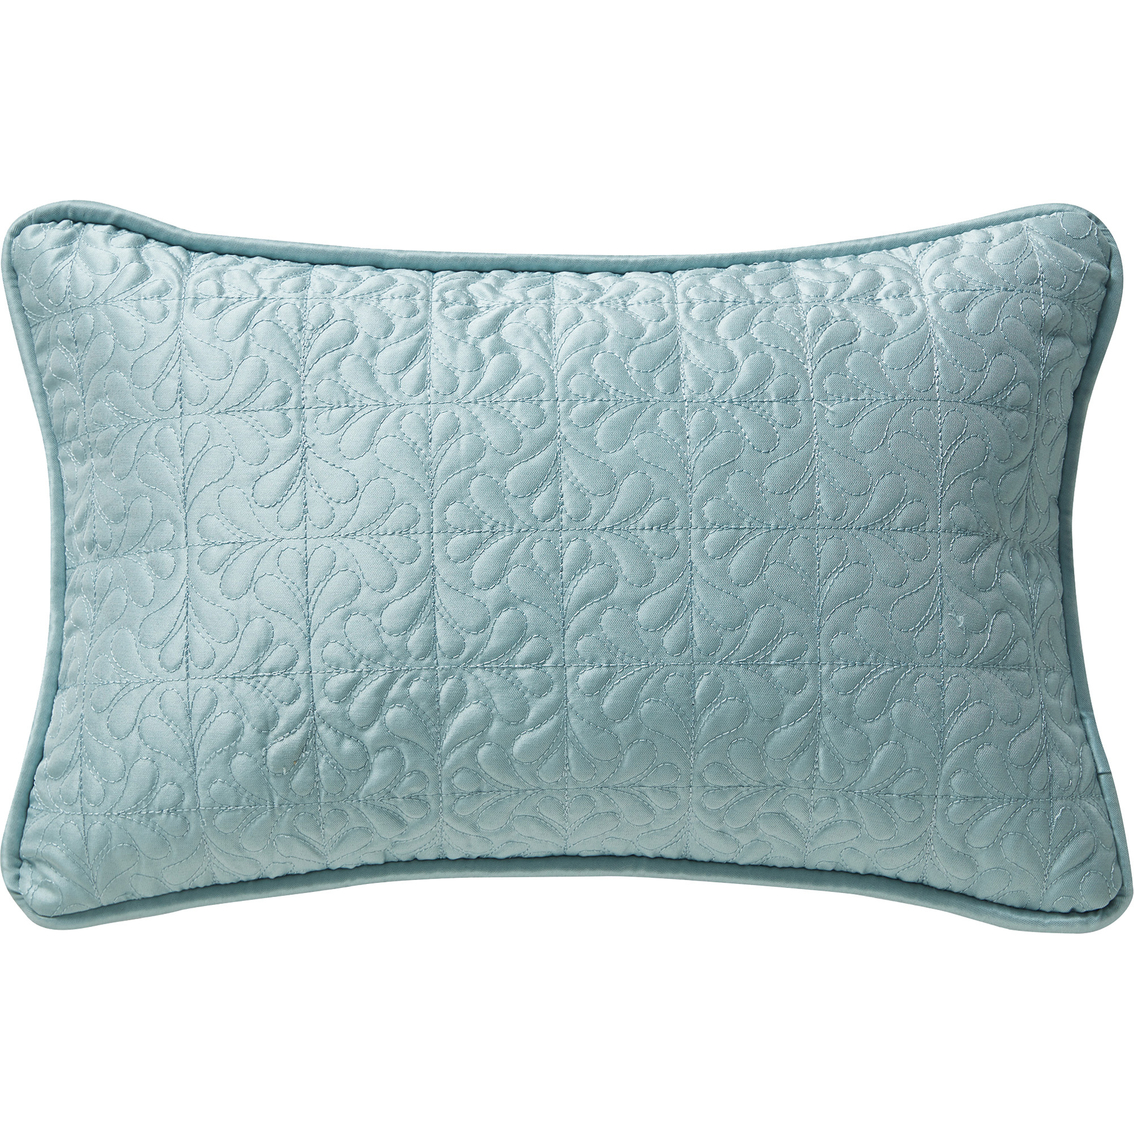 Waterford Paltrow 12 x 18 in. Decorative Pillow - Image 2 of 2